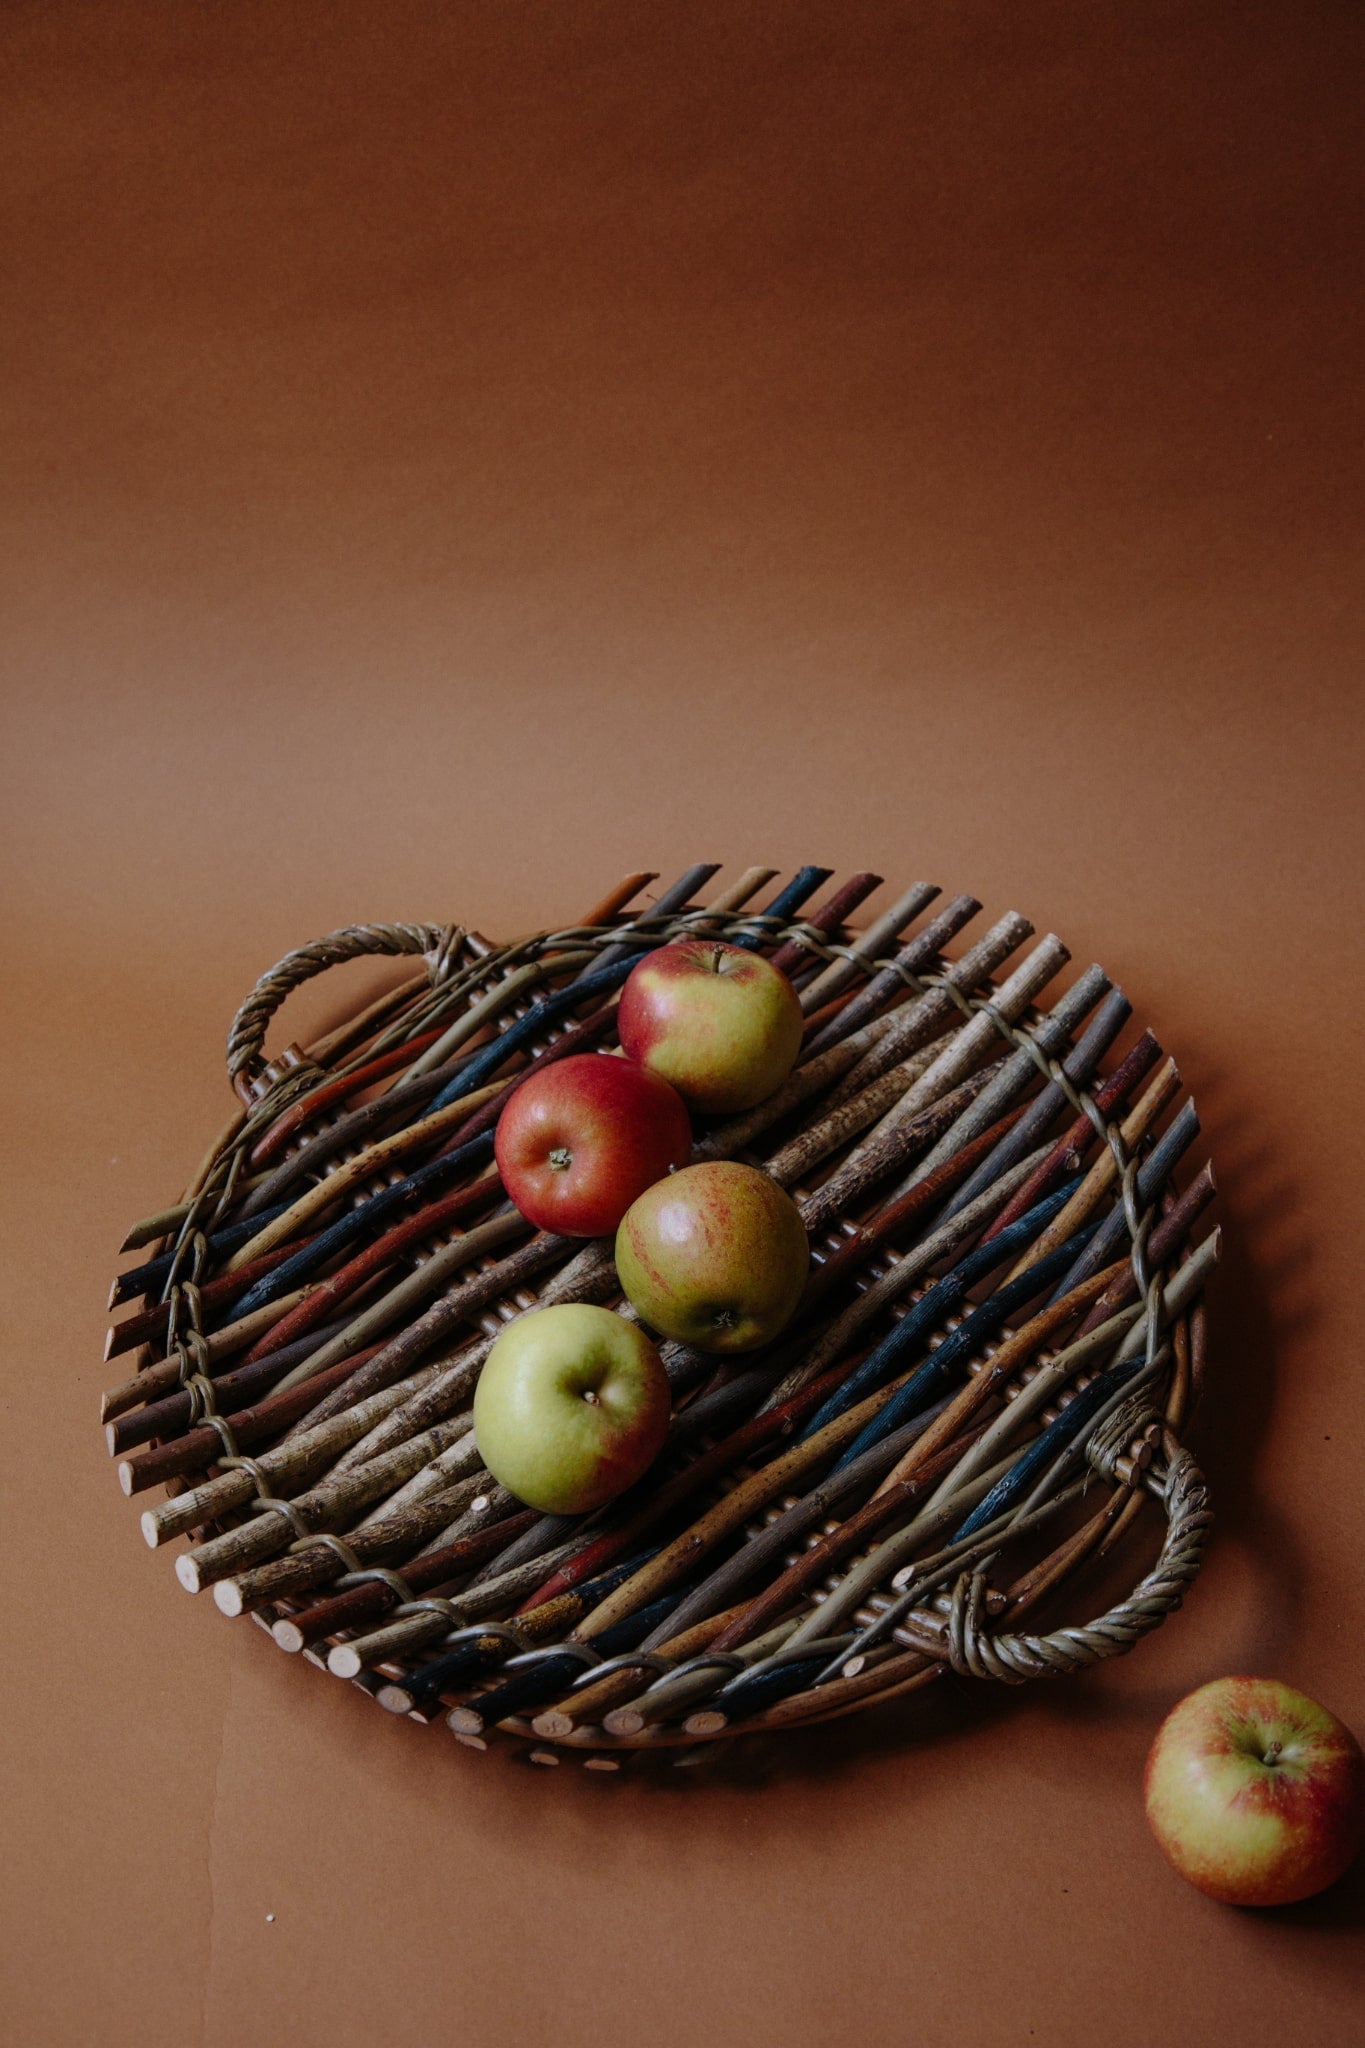 ALT=Circular willow platter woven from woods and willow with two small handles on either side. Platter holds four apples, with a fifth rolling out of frame. Photograph shot on a deep brown background.